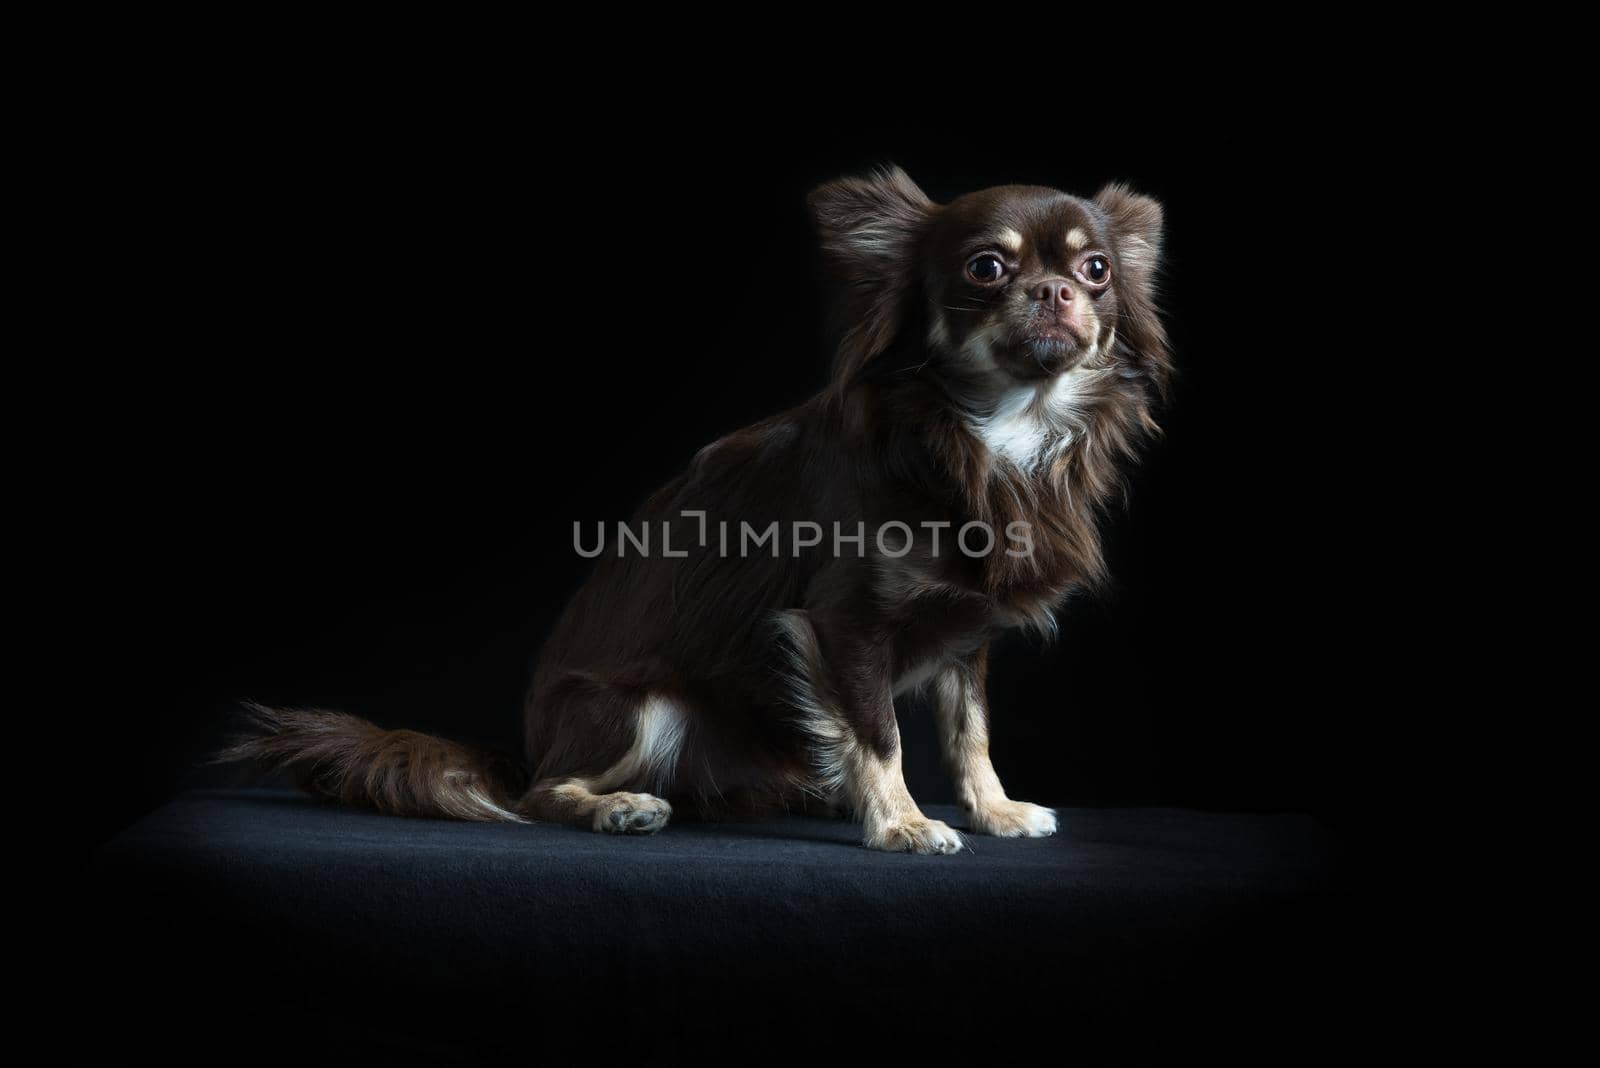 Male long-haired multicolored Chihuahua sitting in black background